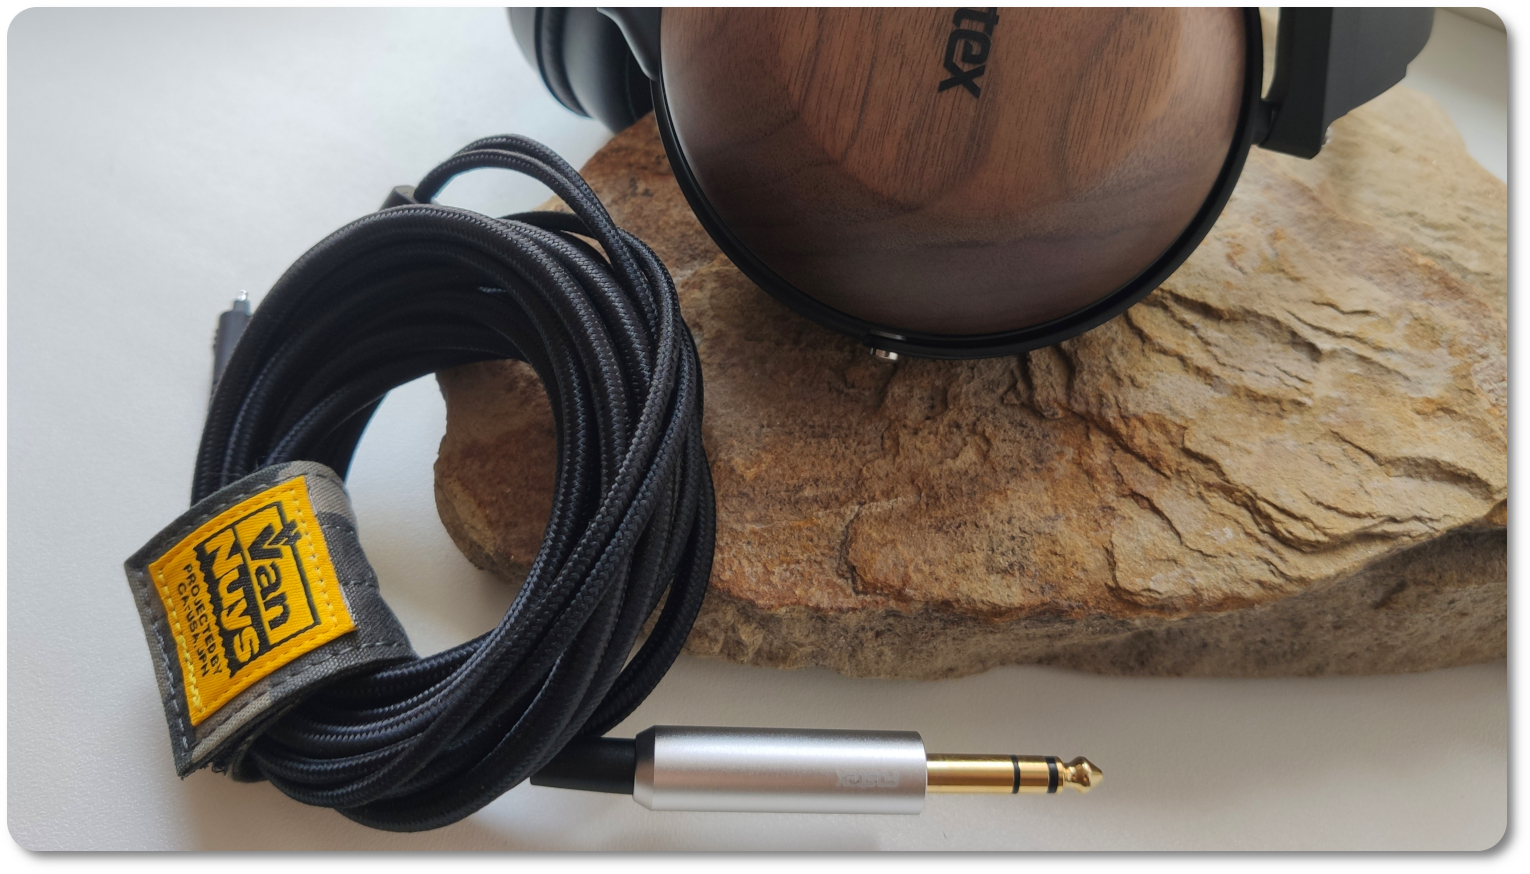 Fostex cable